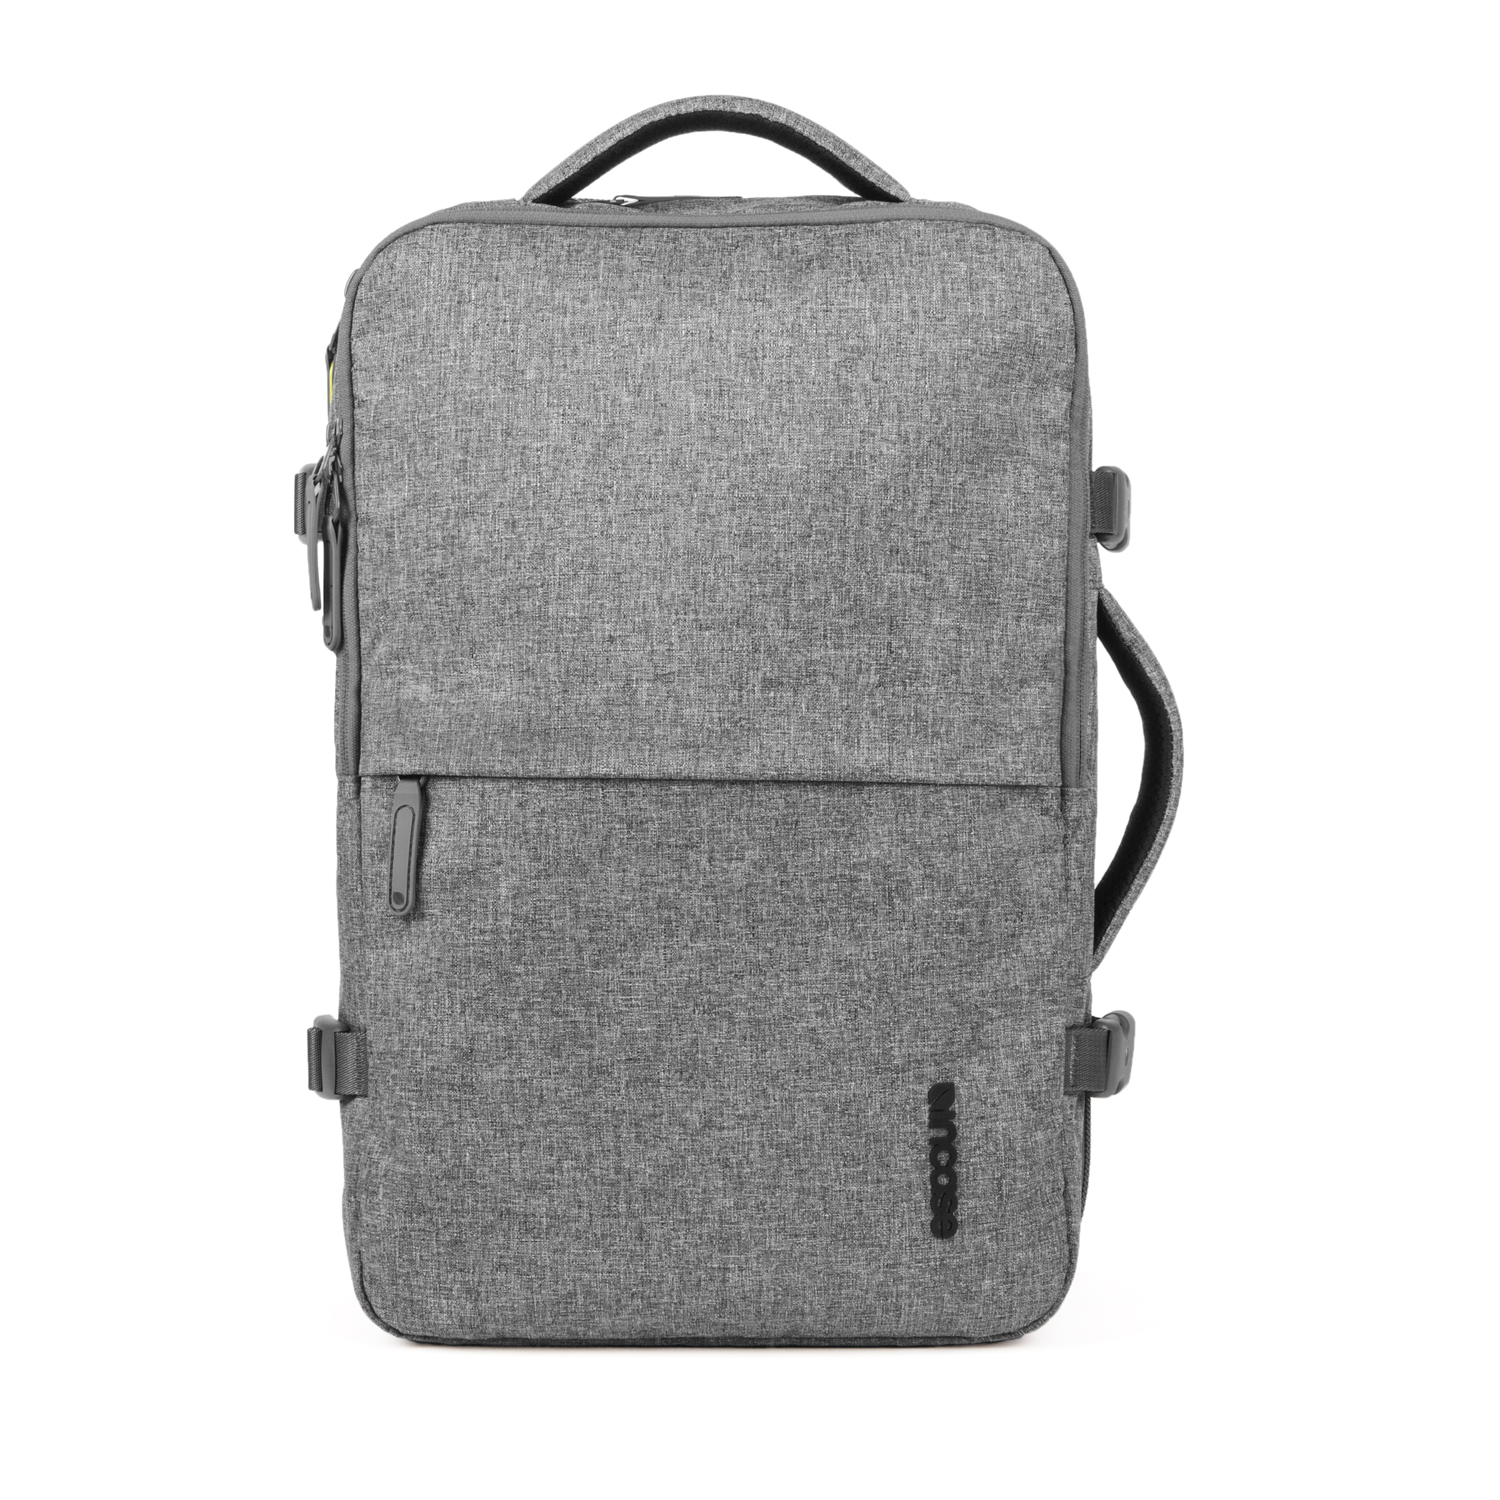 Buy Incase Eo Travel Backpack - Heather Grey in Malaysia - The Wallet ...